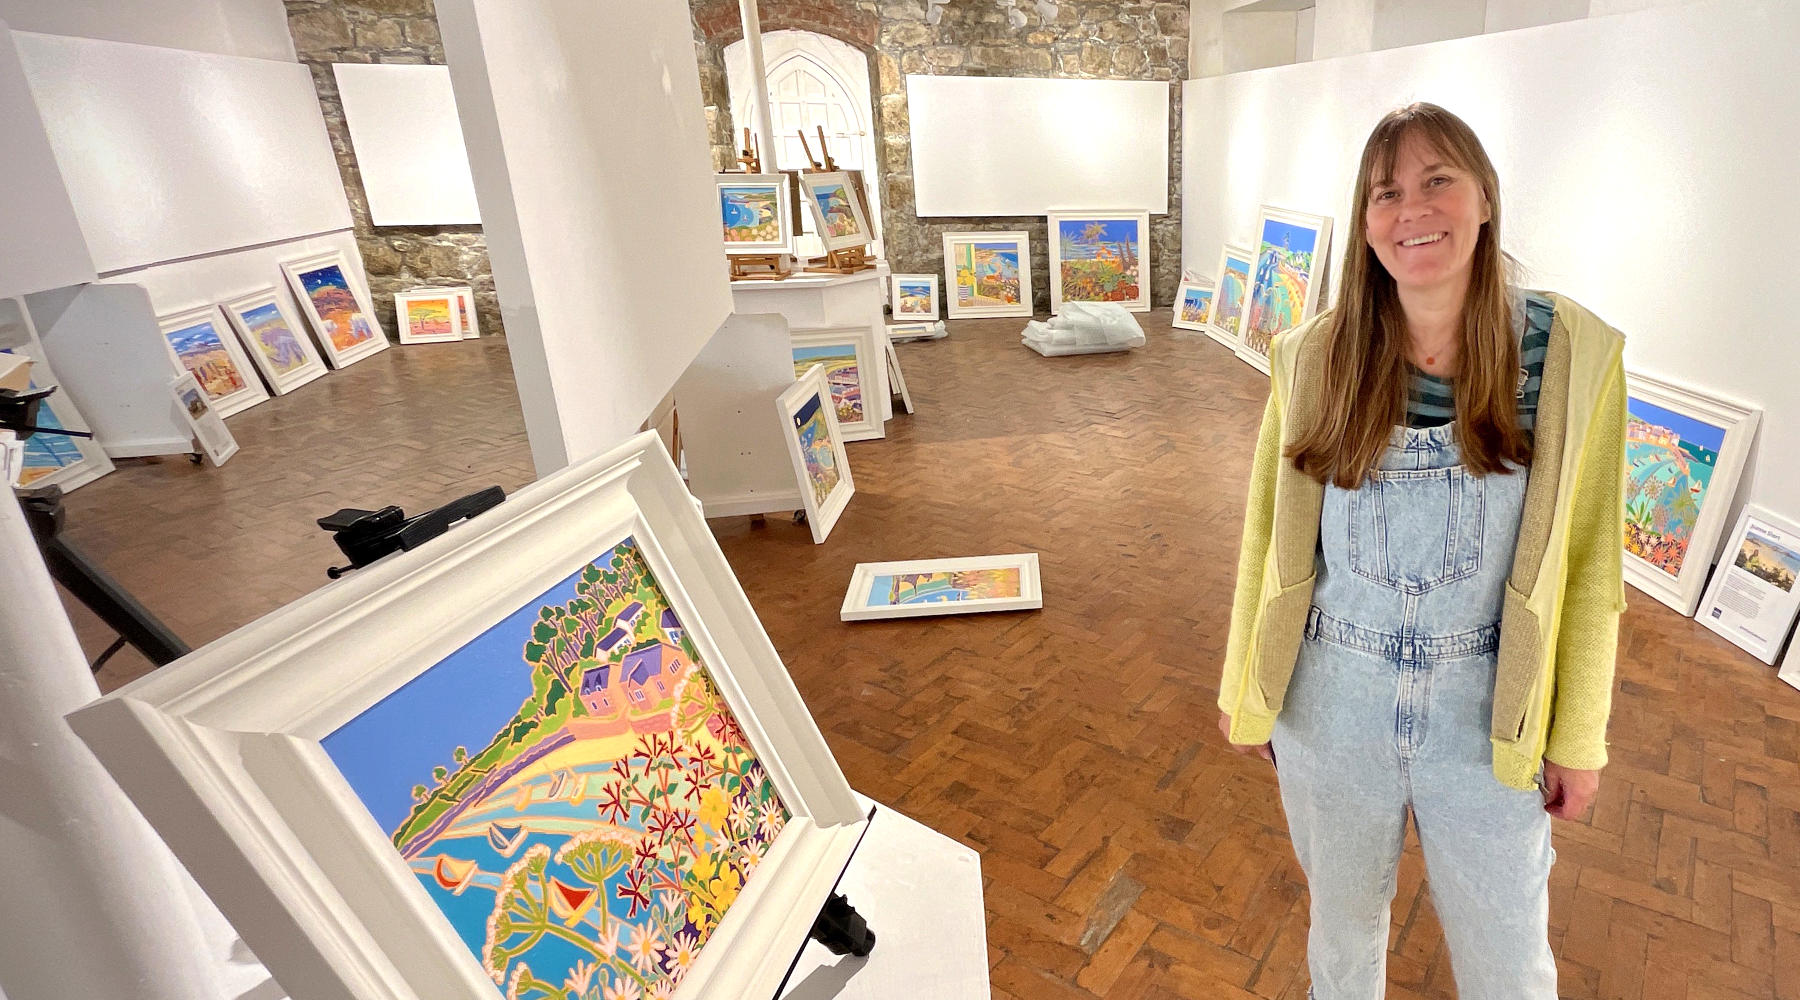 Cornish artist Joanne Short hanging an exhibition of new paintings in St Ives at the St Ives Society of Artists